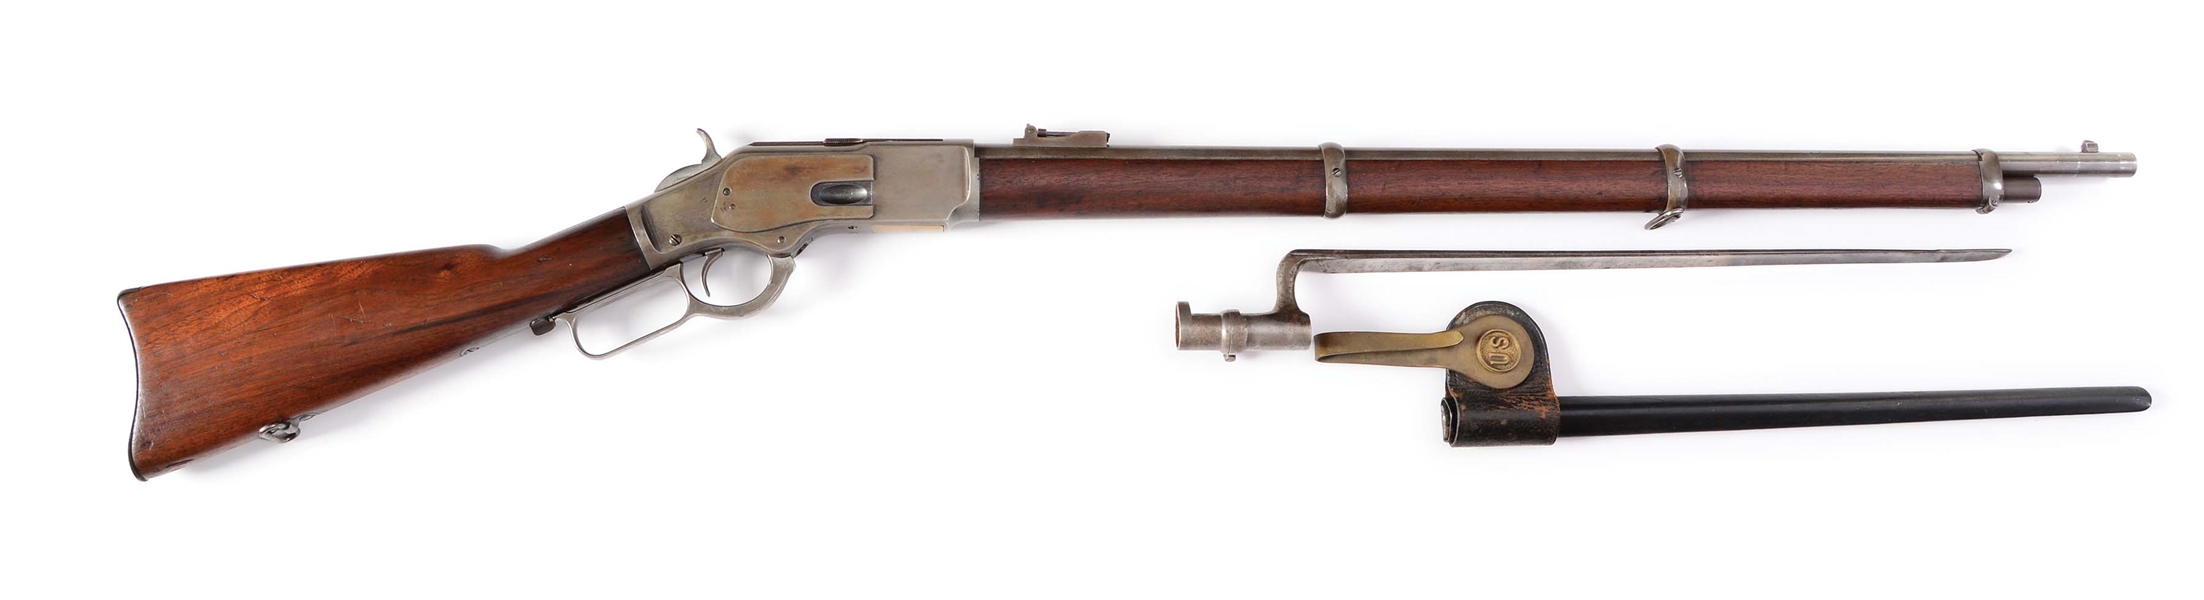 (A) WINCHESTER MODEL 1873 LEVER ACTION MUSKET (1895).